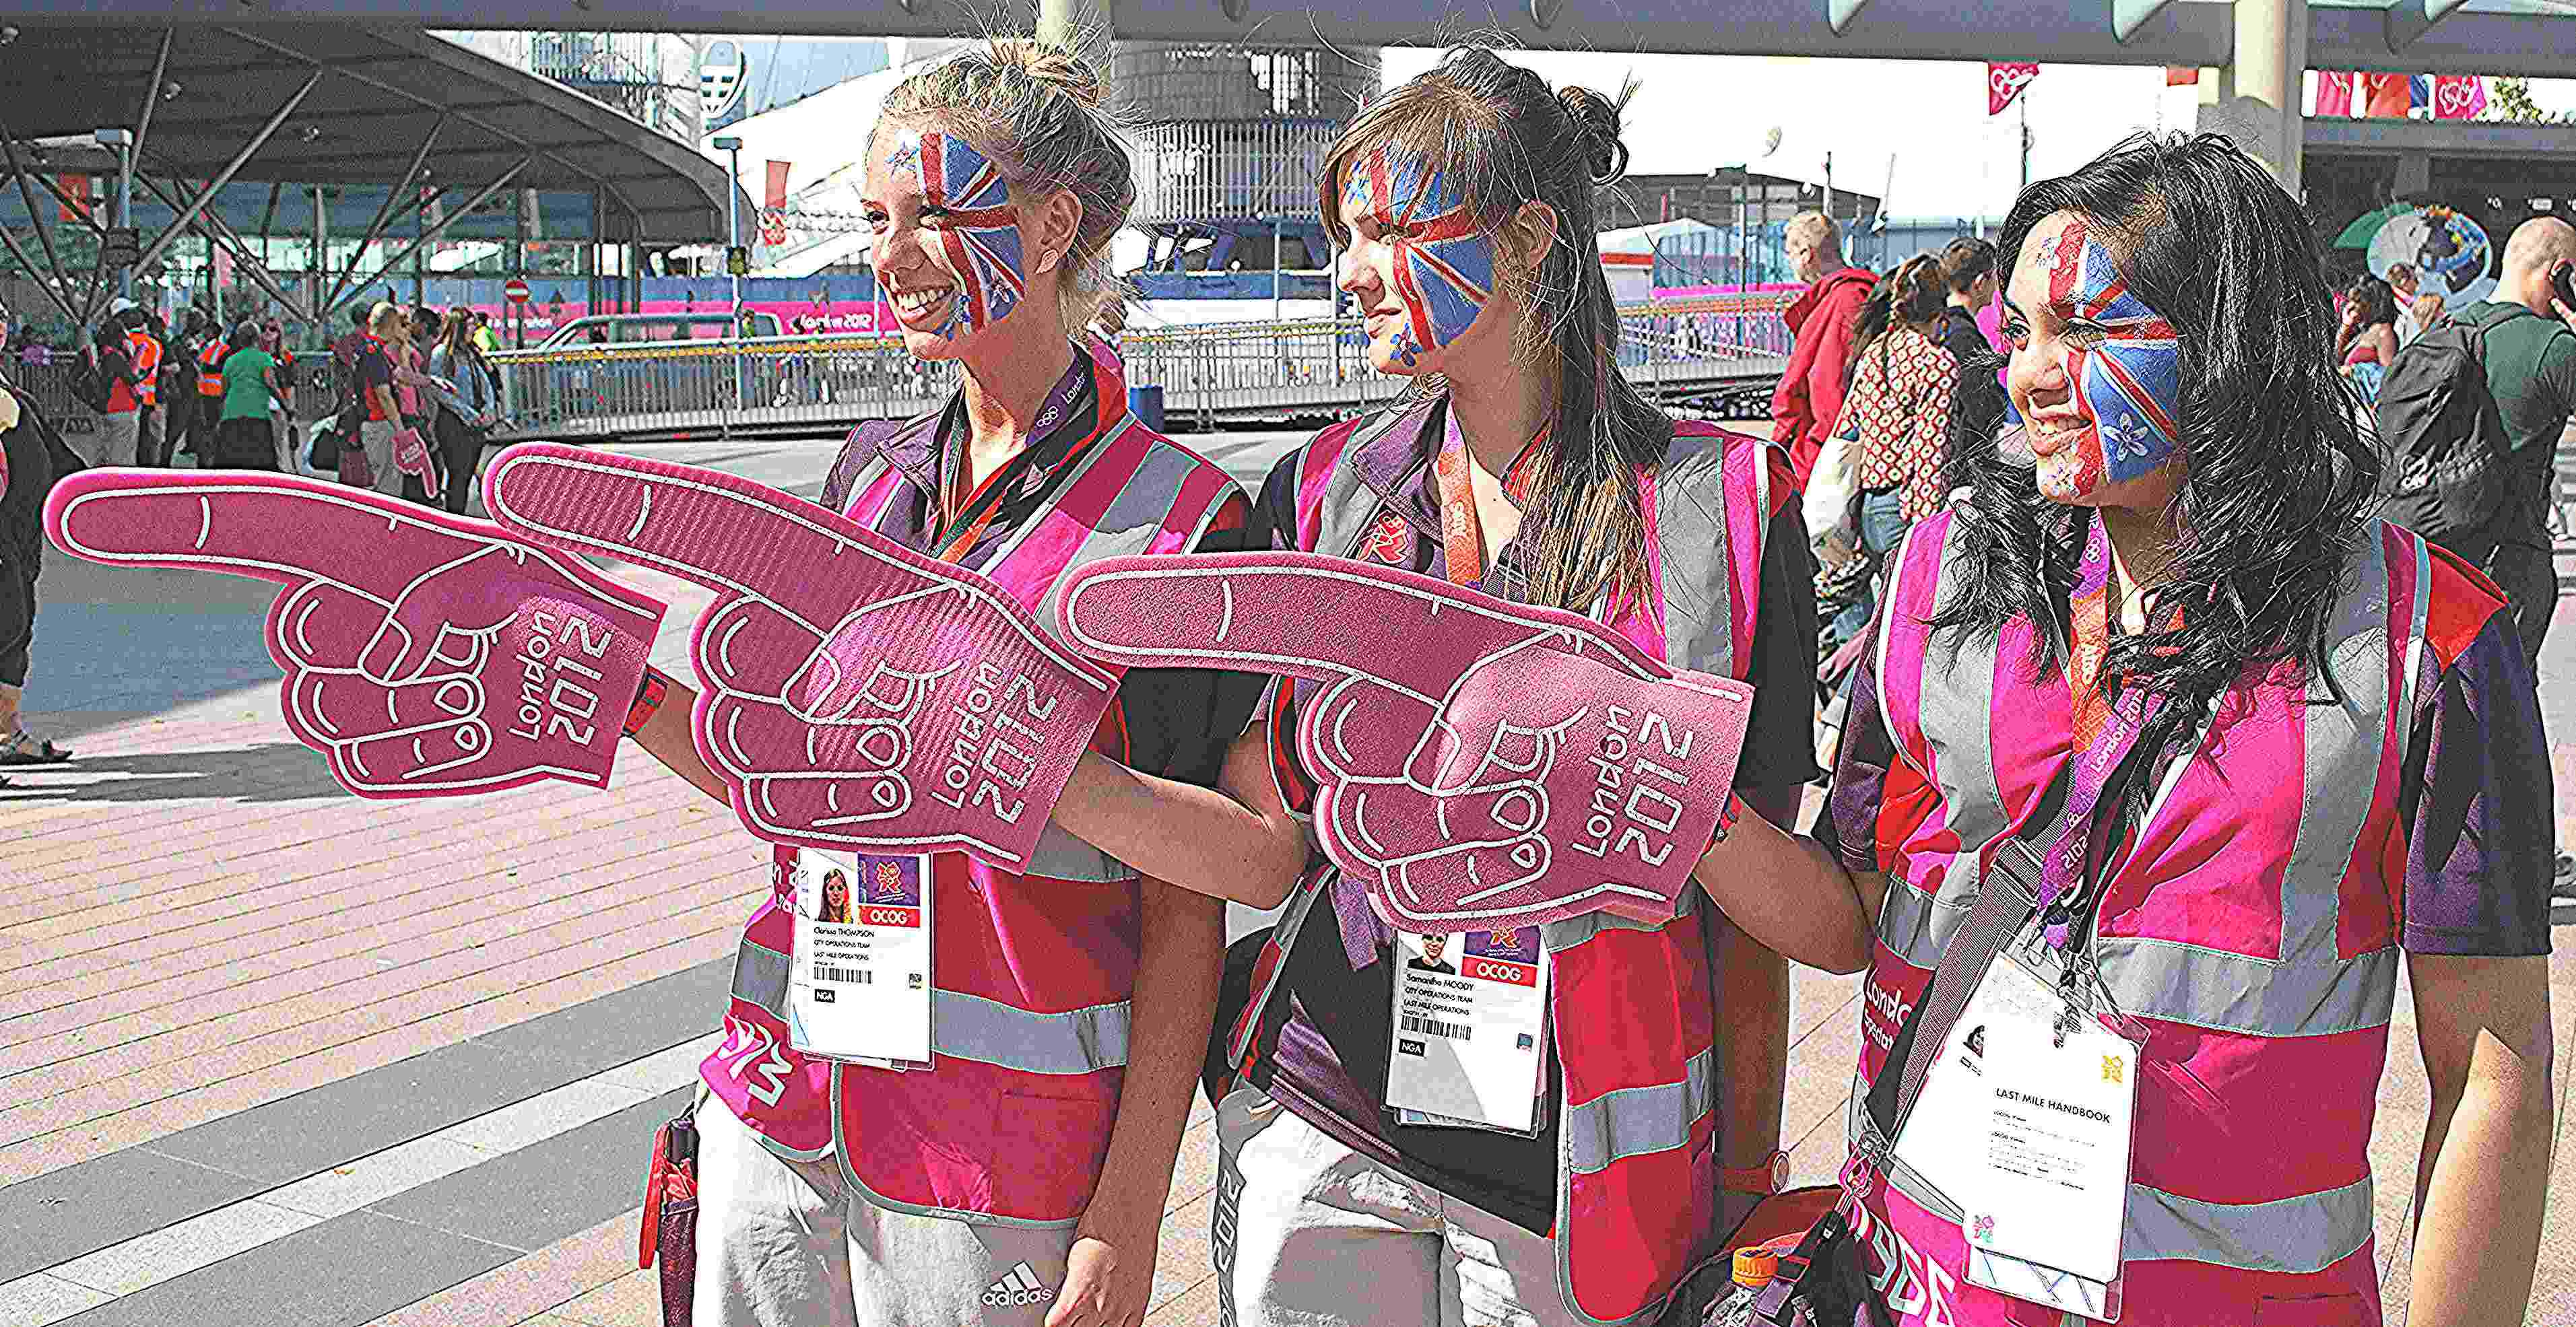 Games Makers at the London 2012 Games featured in new book Inspired By The Games ©Lidia Lundy